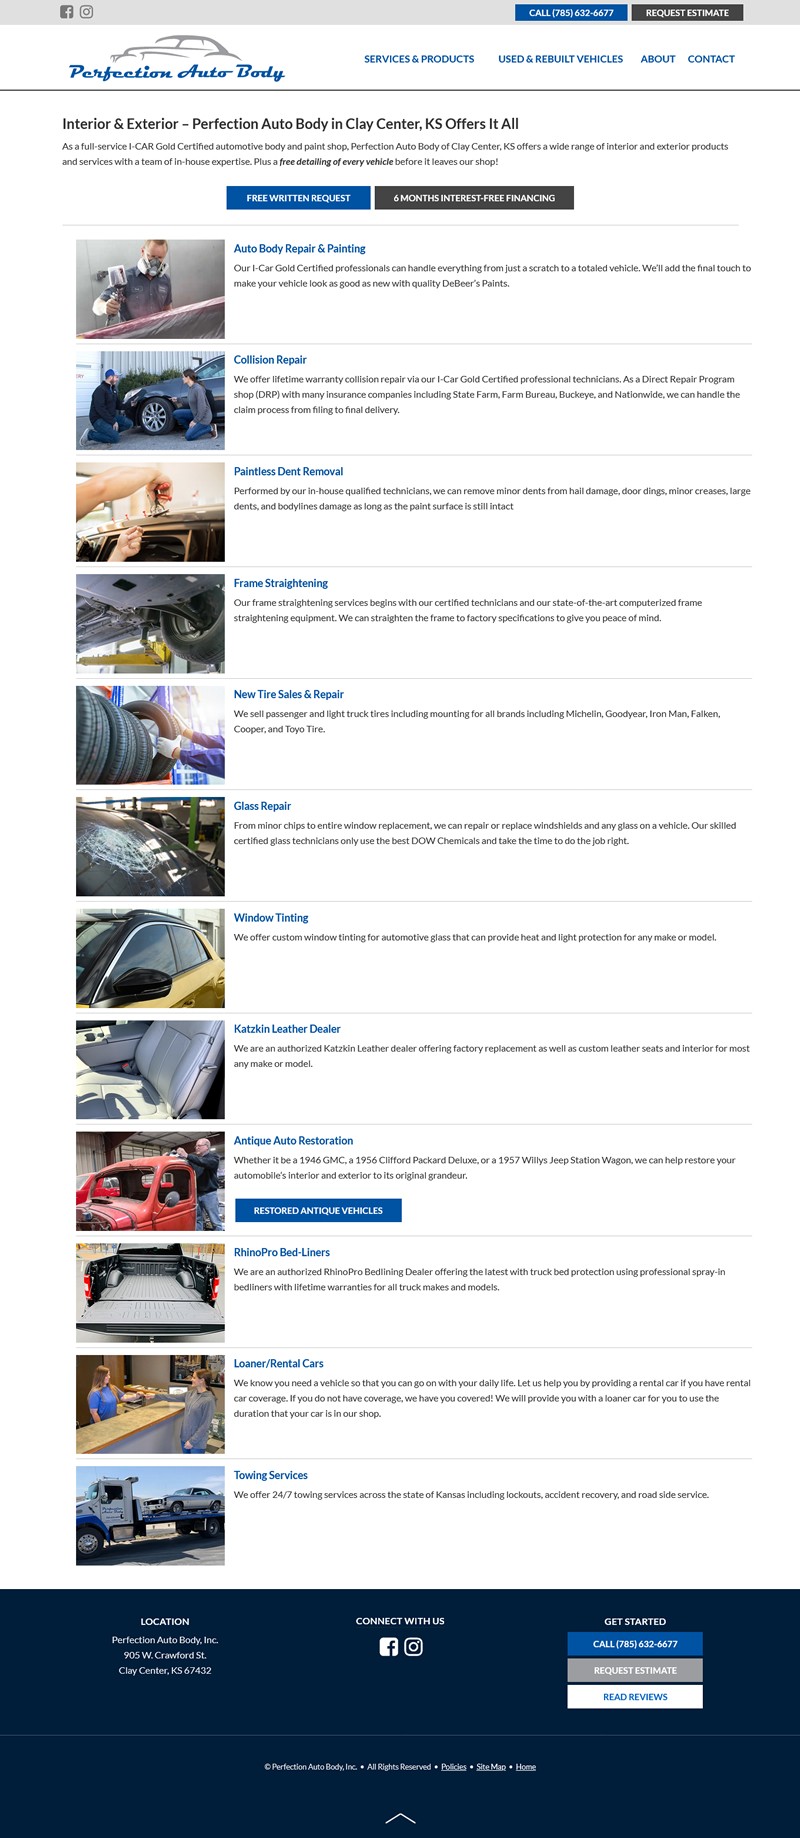 Perfection Auto Body website screenshot services page